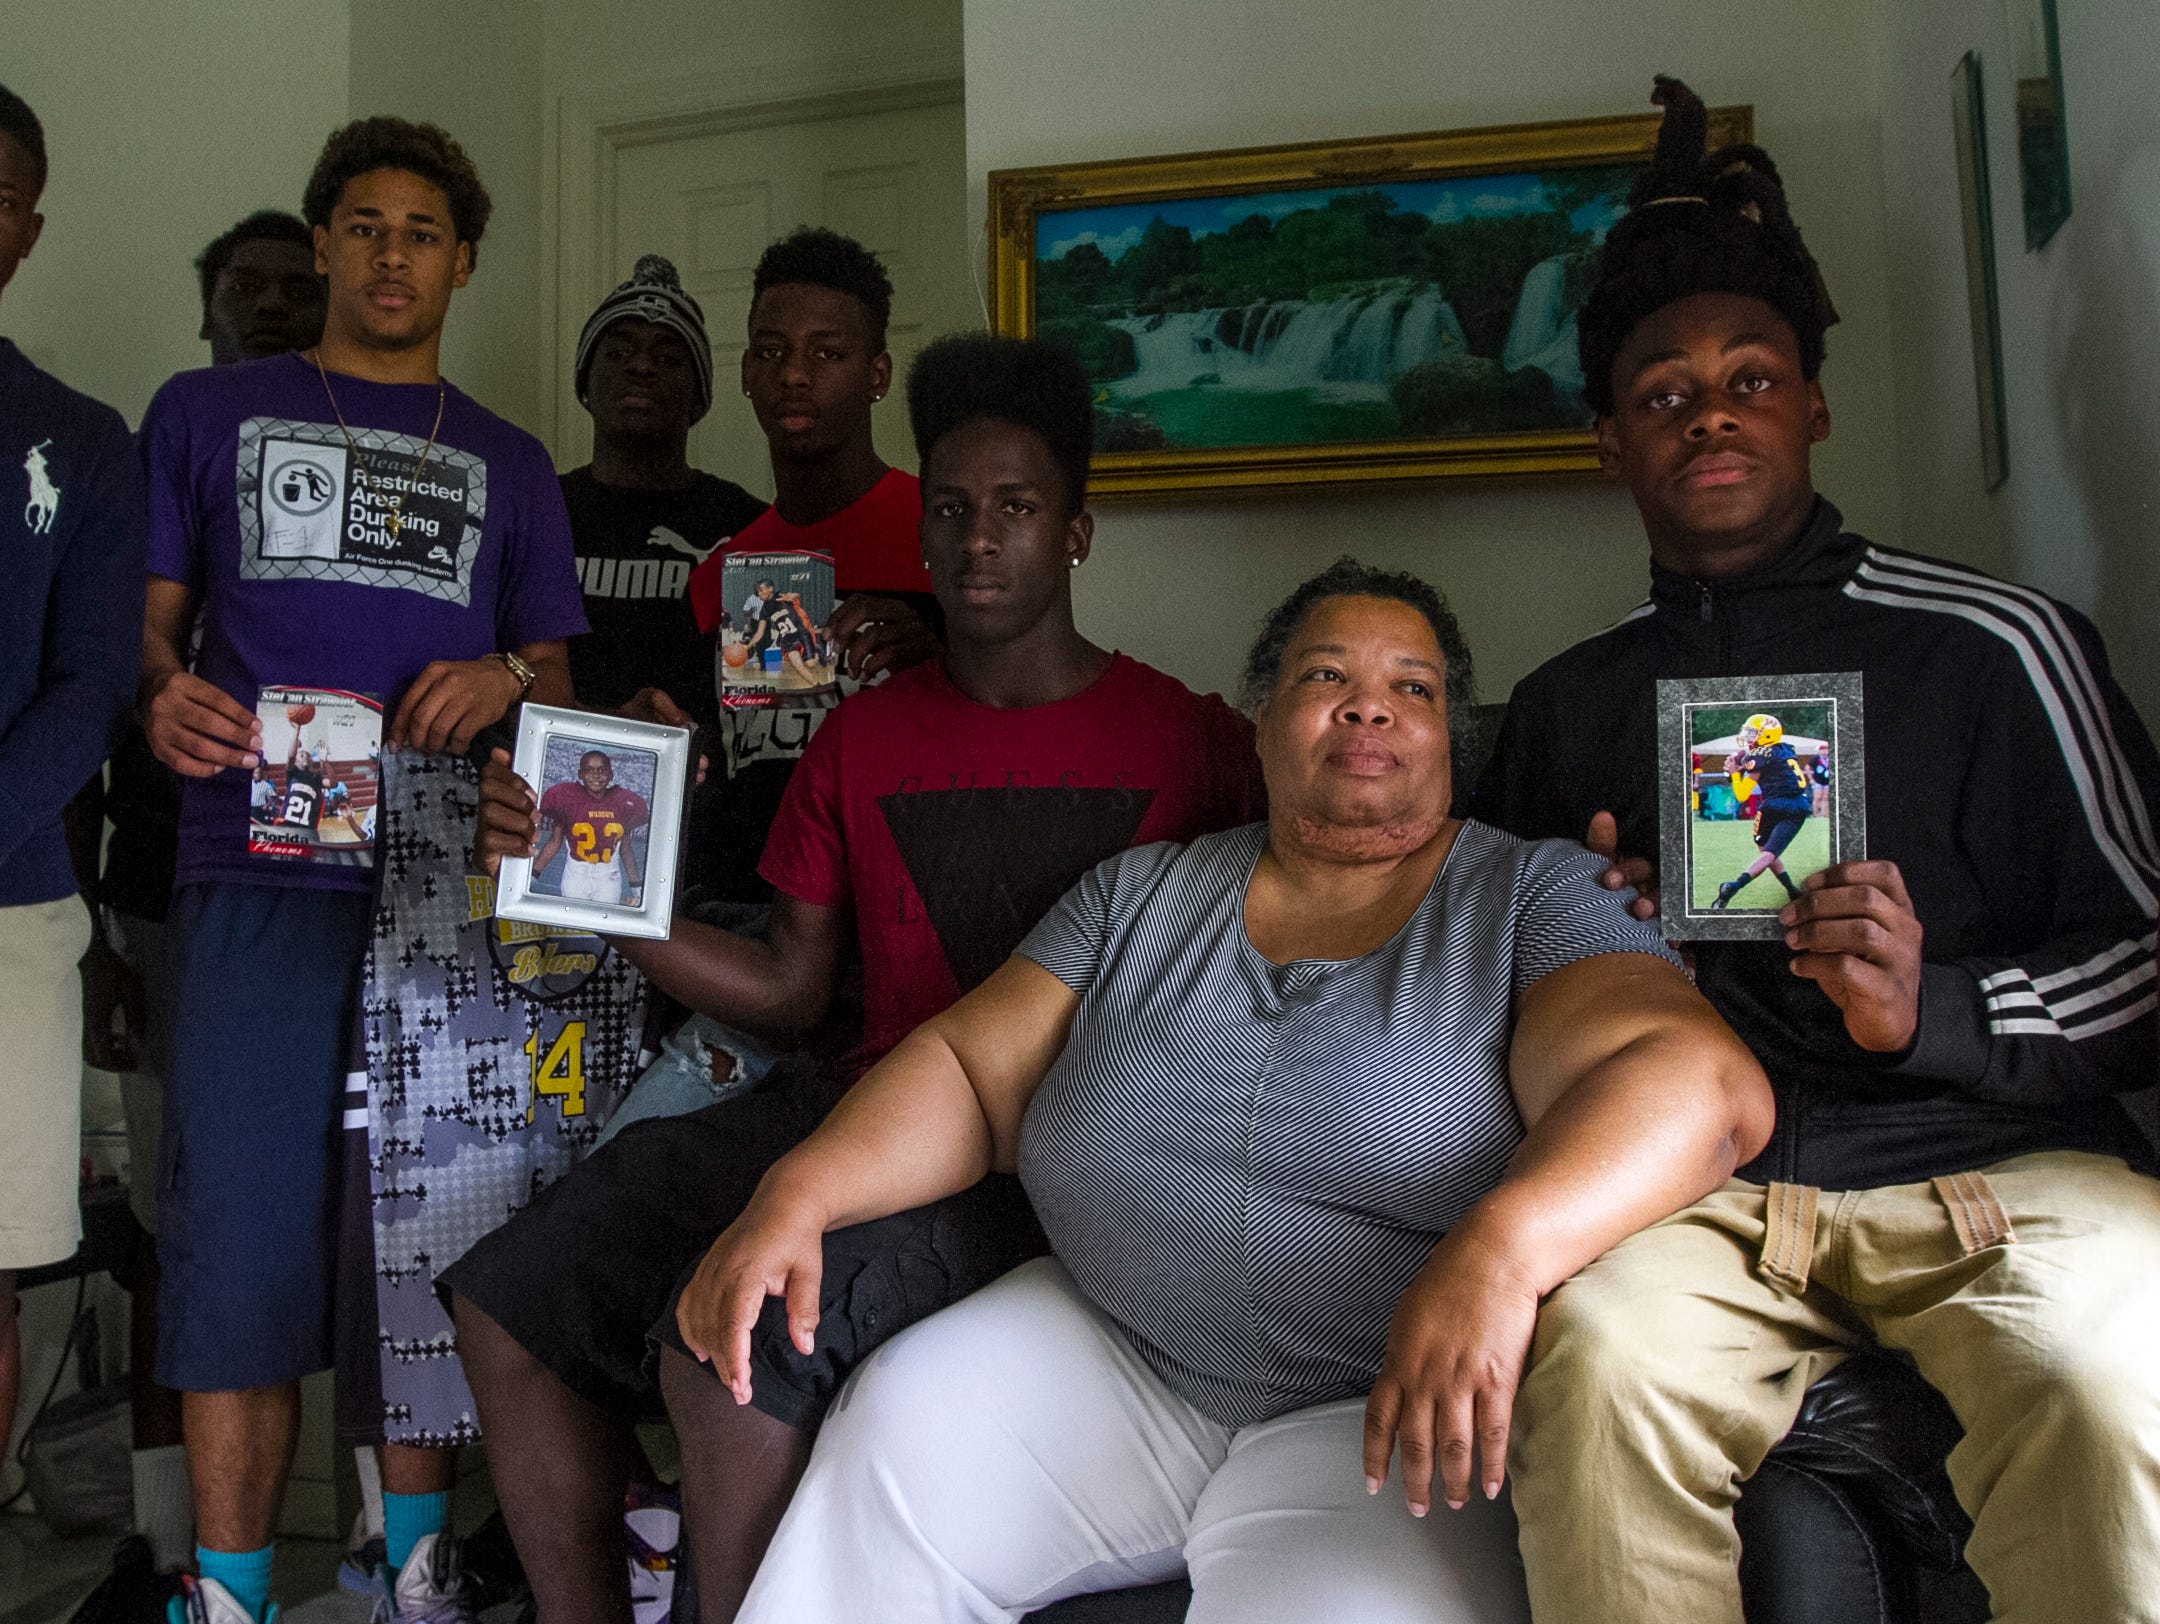 Stephanie White, Stef'An Strawder's mother, is surrounded by her son's friends and teammates Monday afternoon at her home in Lehigh Acres. Her son's friends and teammates were visiting to provide her with support as she grieved her son's loss earlier that day during a shooting in Fort Myers.